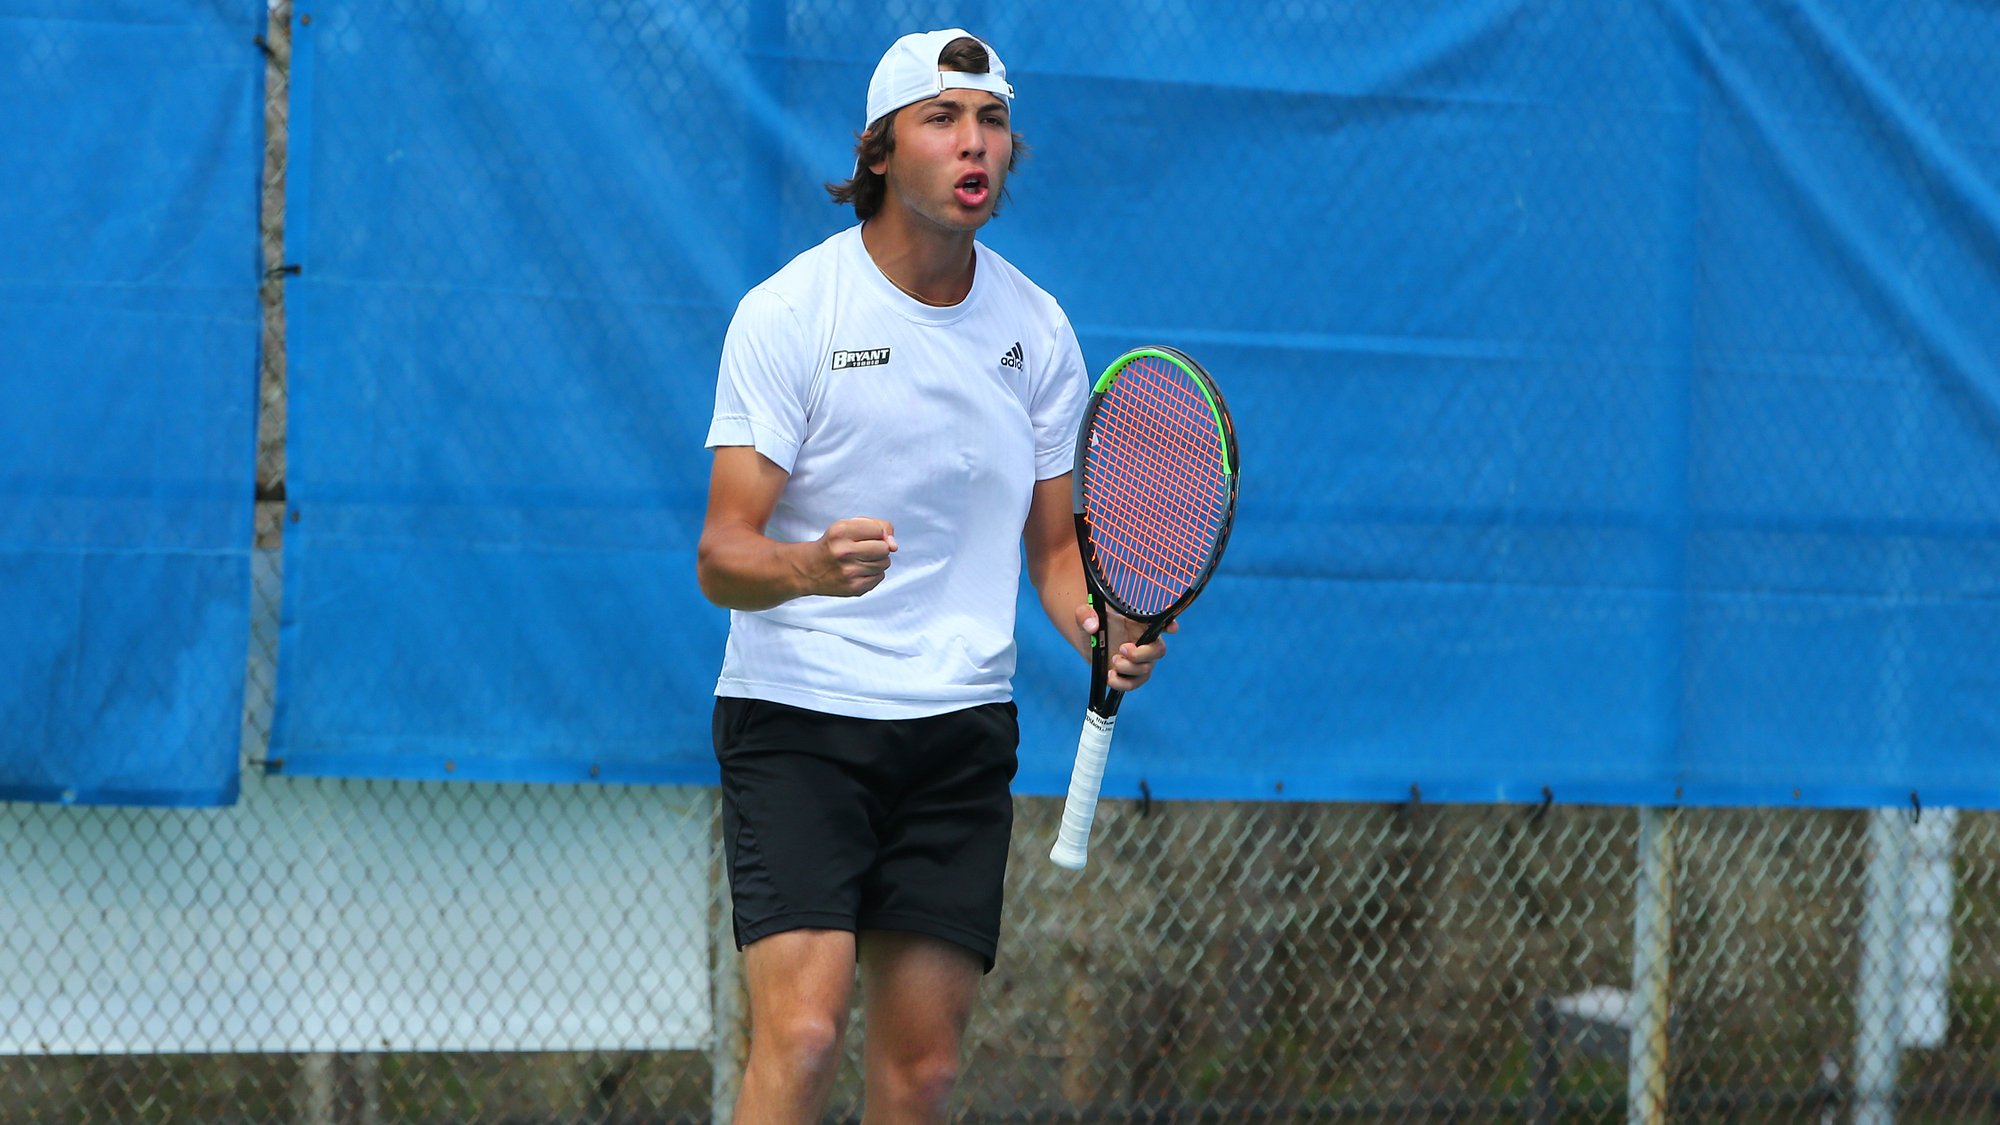 Mileikowsky, Serra Sparrow compete in ITA Supers this weekend